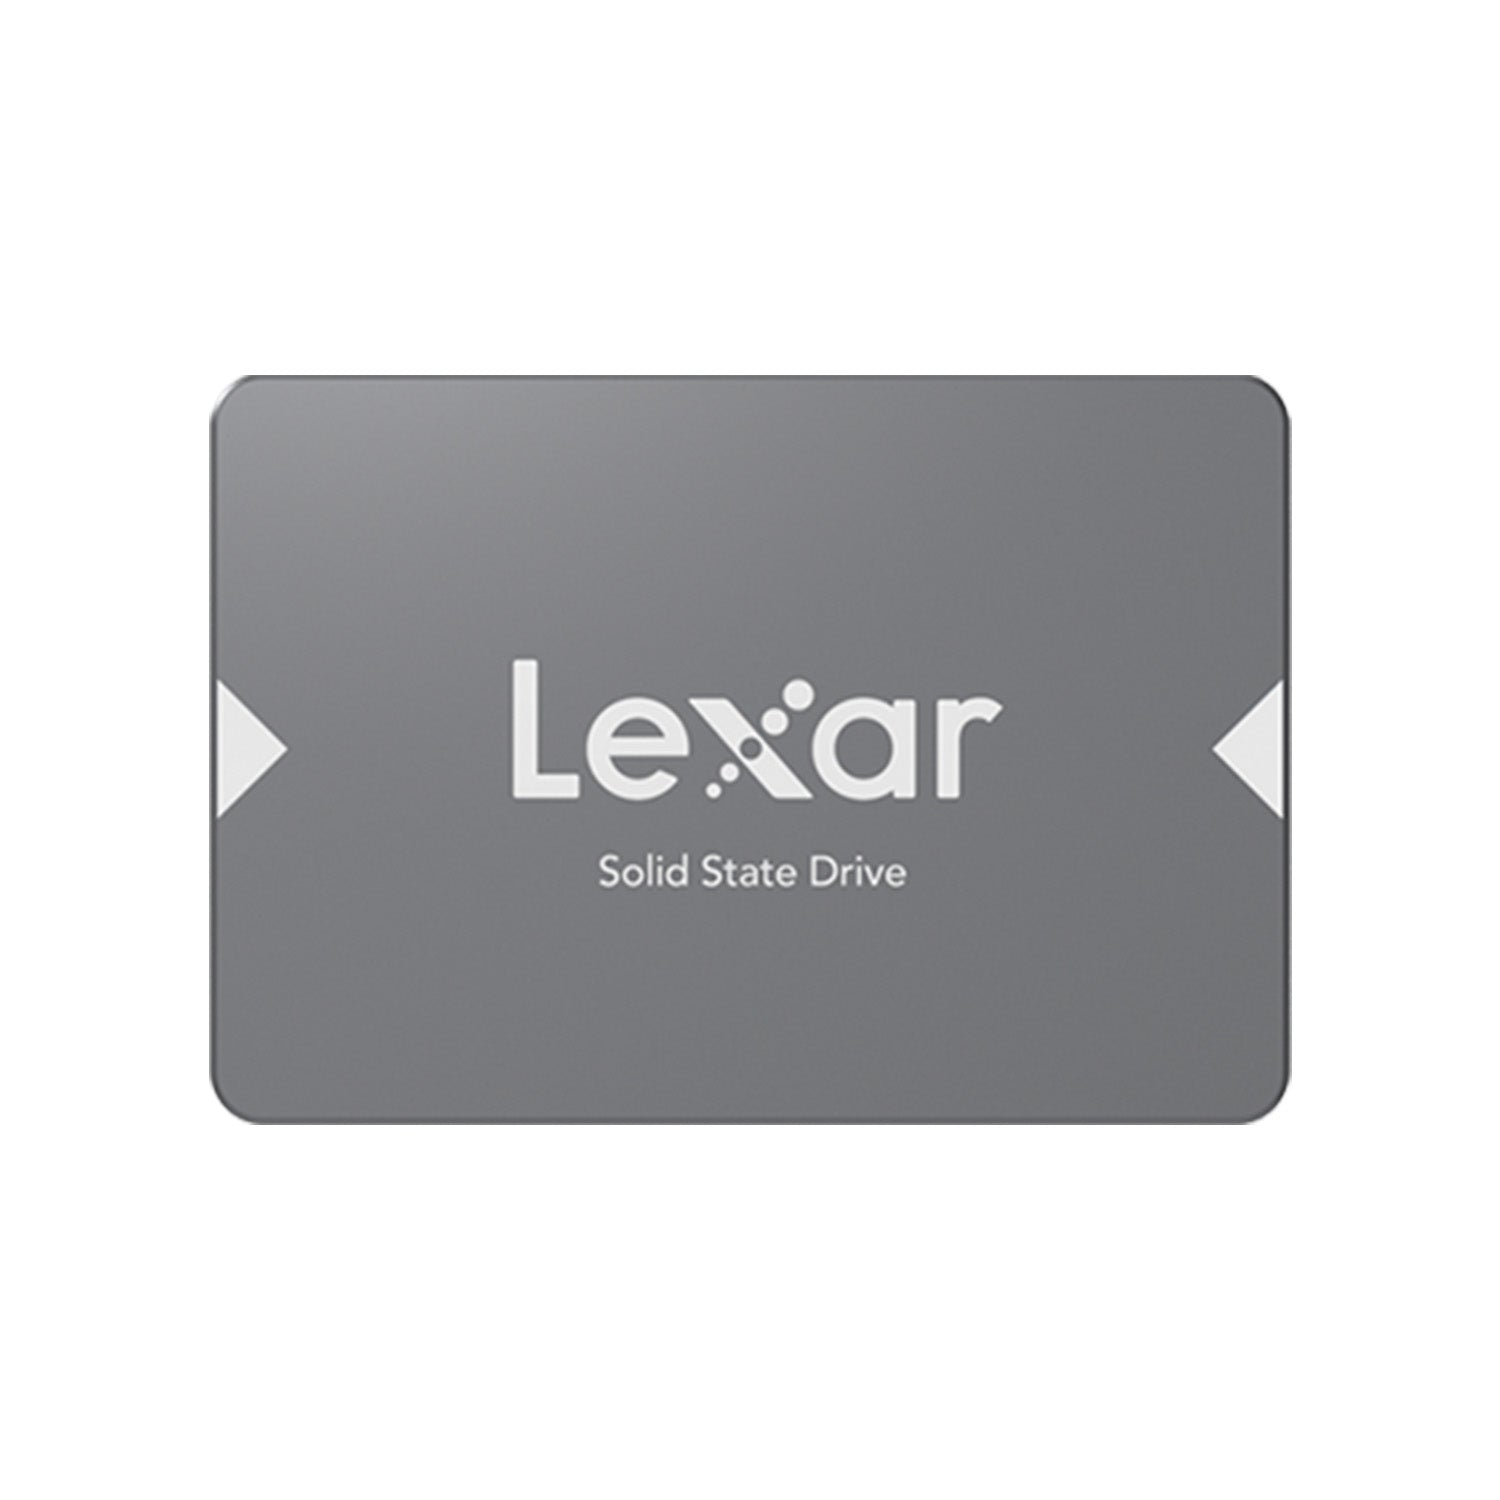 Lexar NS100 2.5 Inch SATA III Solid State Drive (6GB/S) 1TB Internal SSD, Up to 550 MB/s Sequential Read Speed Micro SATA Form Factor (LNS100-1TRBNA)